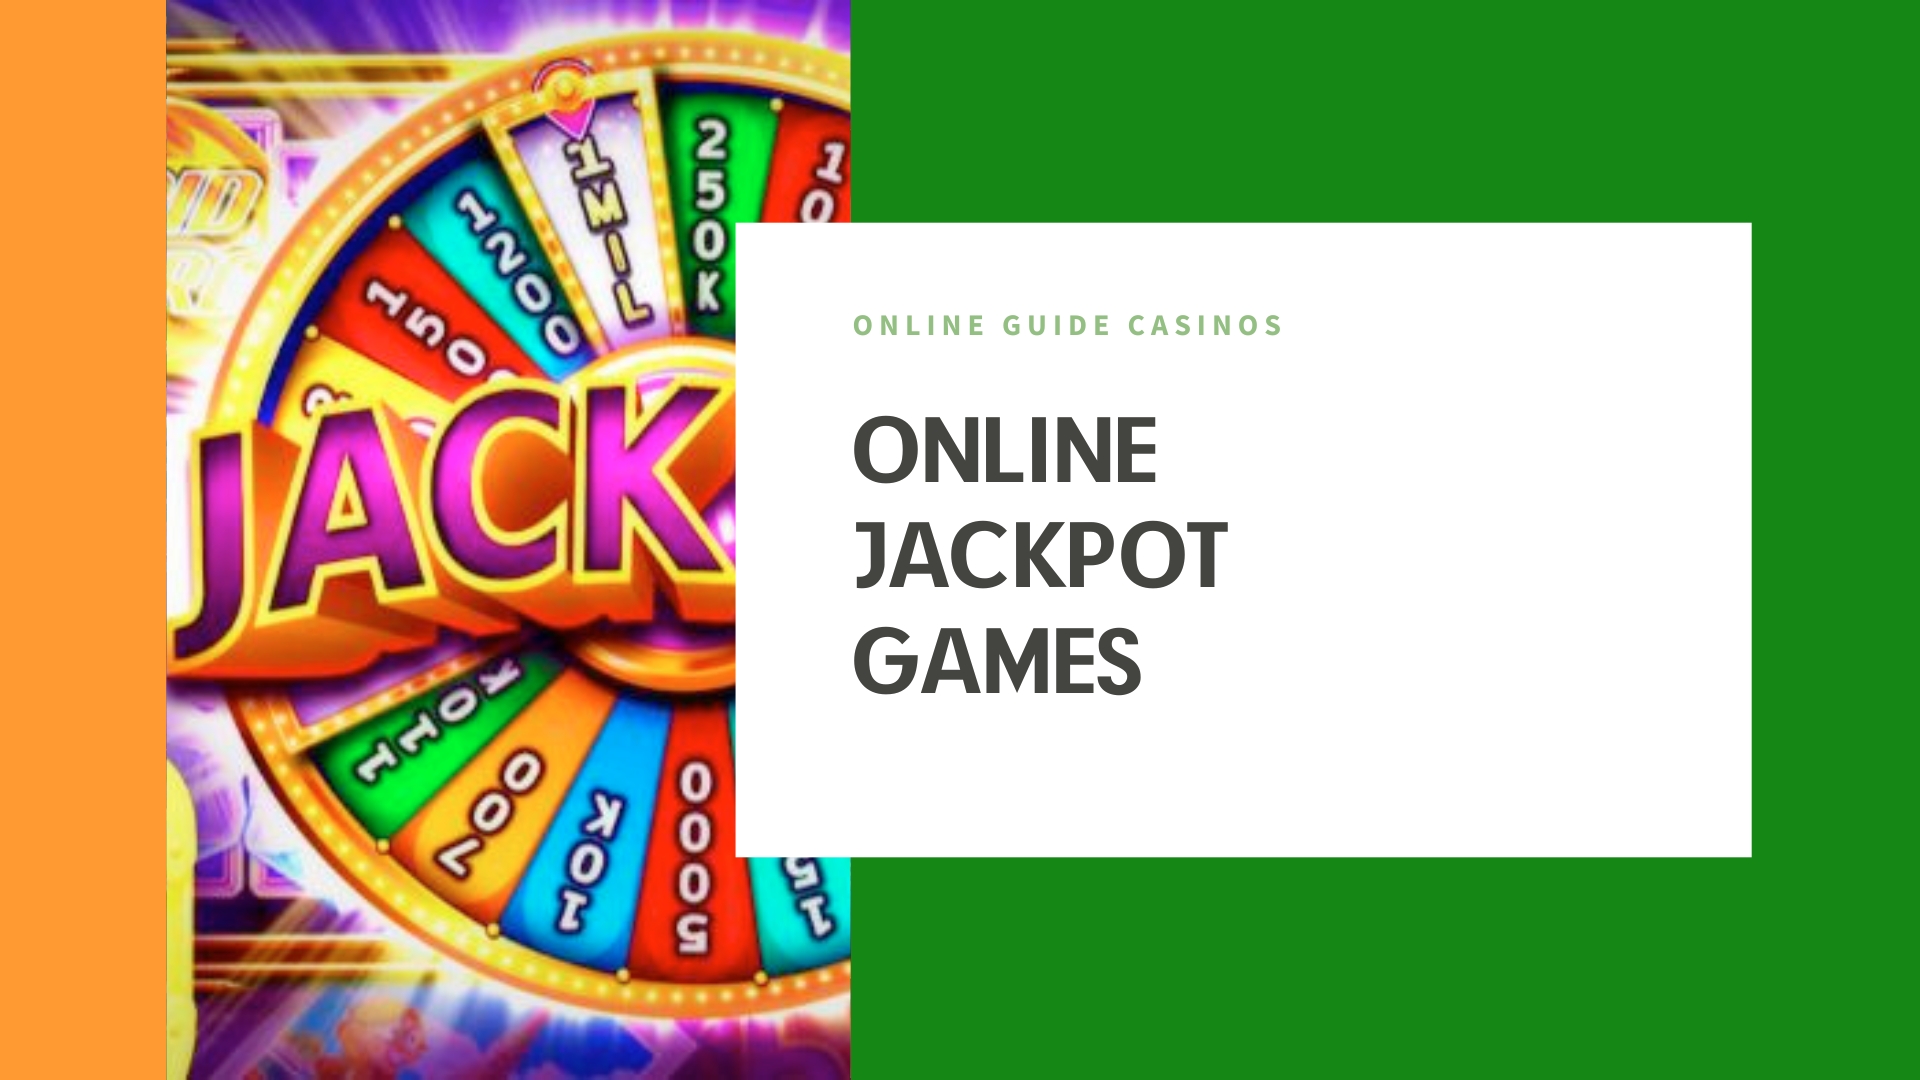 Big luck awaits you with jackpots in India